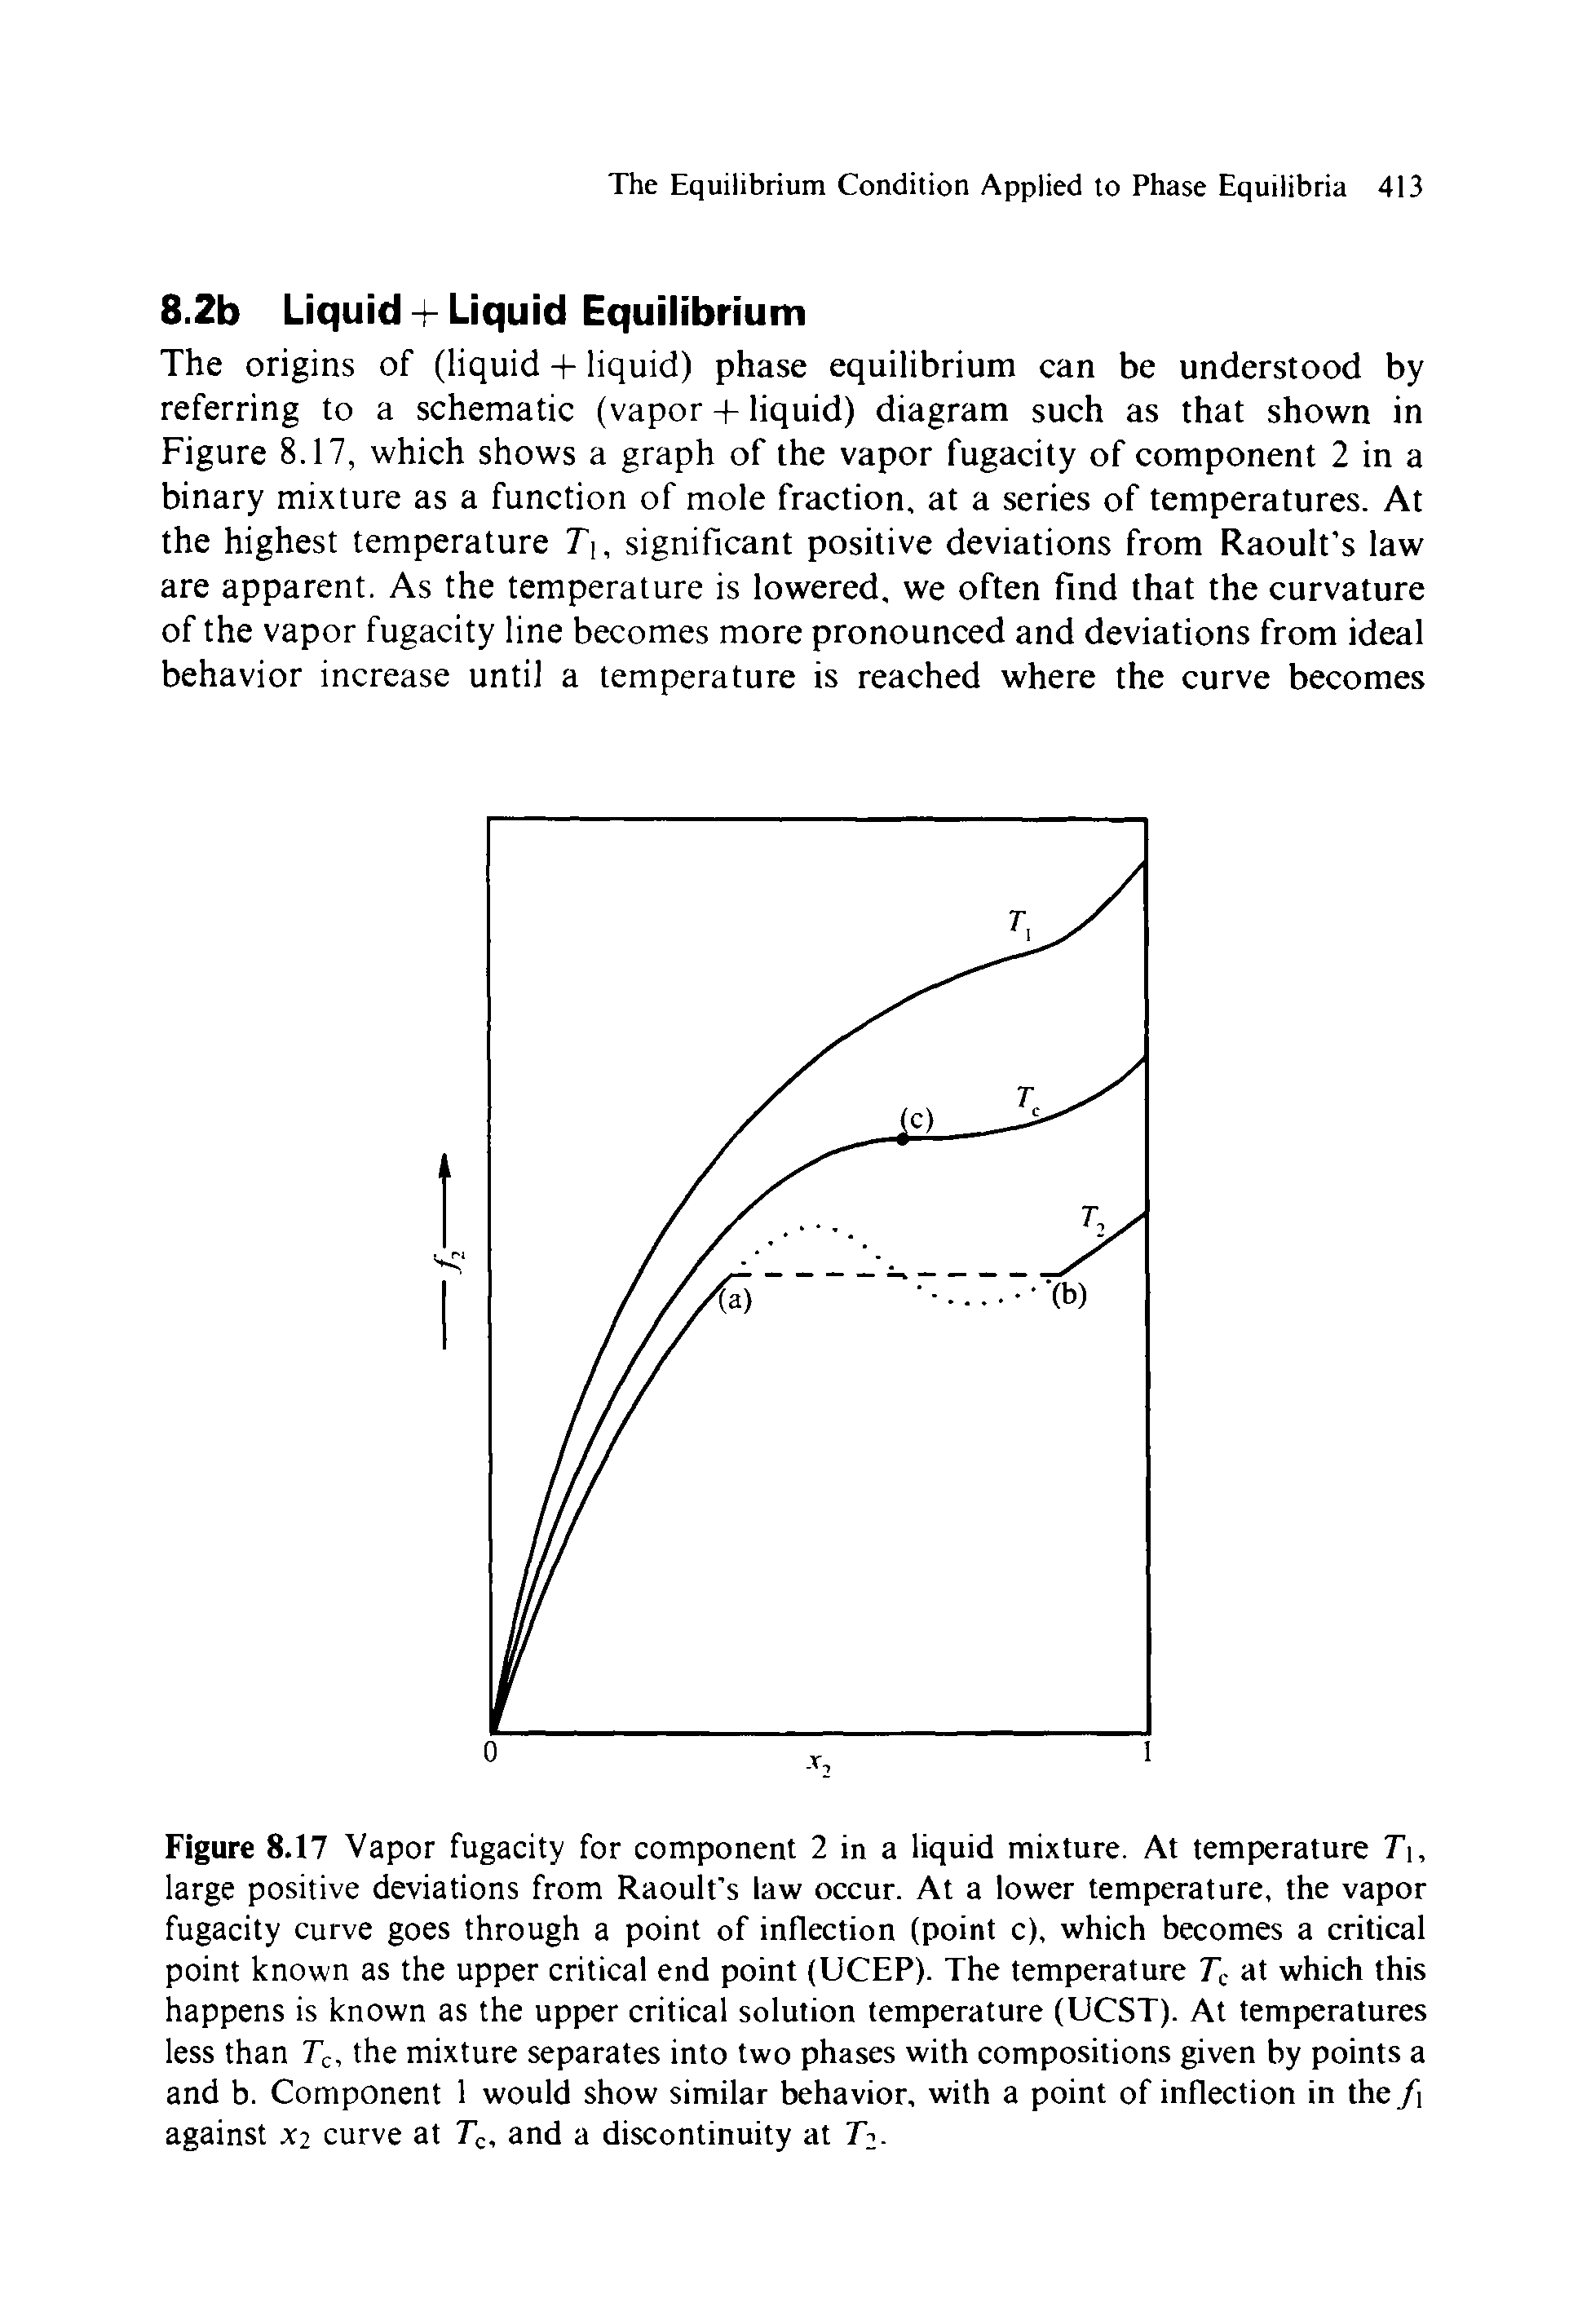 Figure 8.17 Vapor fugacity for component 2 in a liquid mixture. At temperature T, large positive deviations from Raoult s law occur. At a lower temperature, the vapor fugacity curve goes through a point of inflection (point c), which becomes a critical point known as the upper critical end point (UCEP). The temperature Tc at which this happens is known as the upper critical solution temperature (UCST). At temperatures less than Tc, the mixture separates into two phases with compositions given by points a and b. Component 1 would show similar behavior, with a point of inflection in the f against X2 curve at Tc, and a discontinuity at 7V...